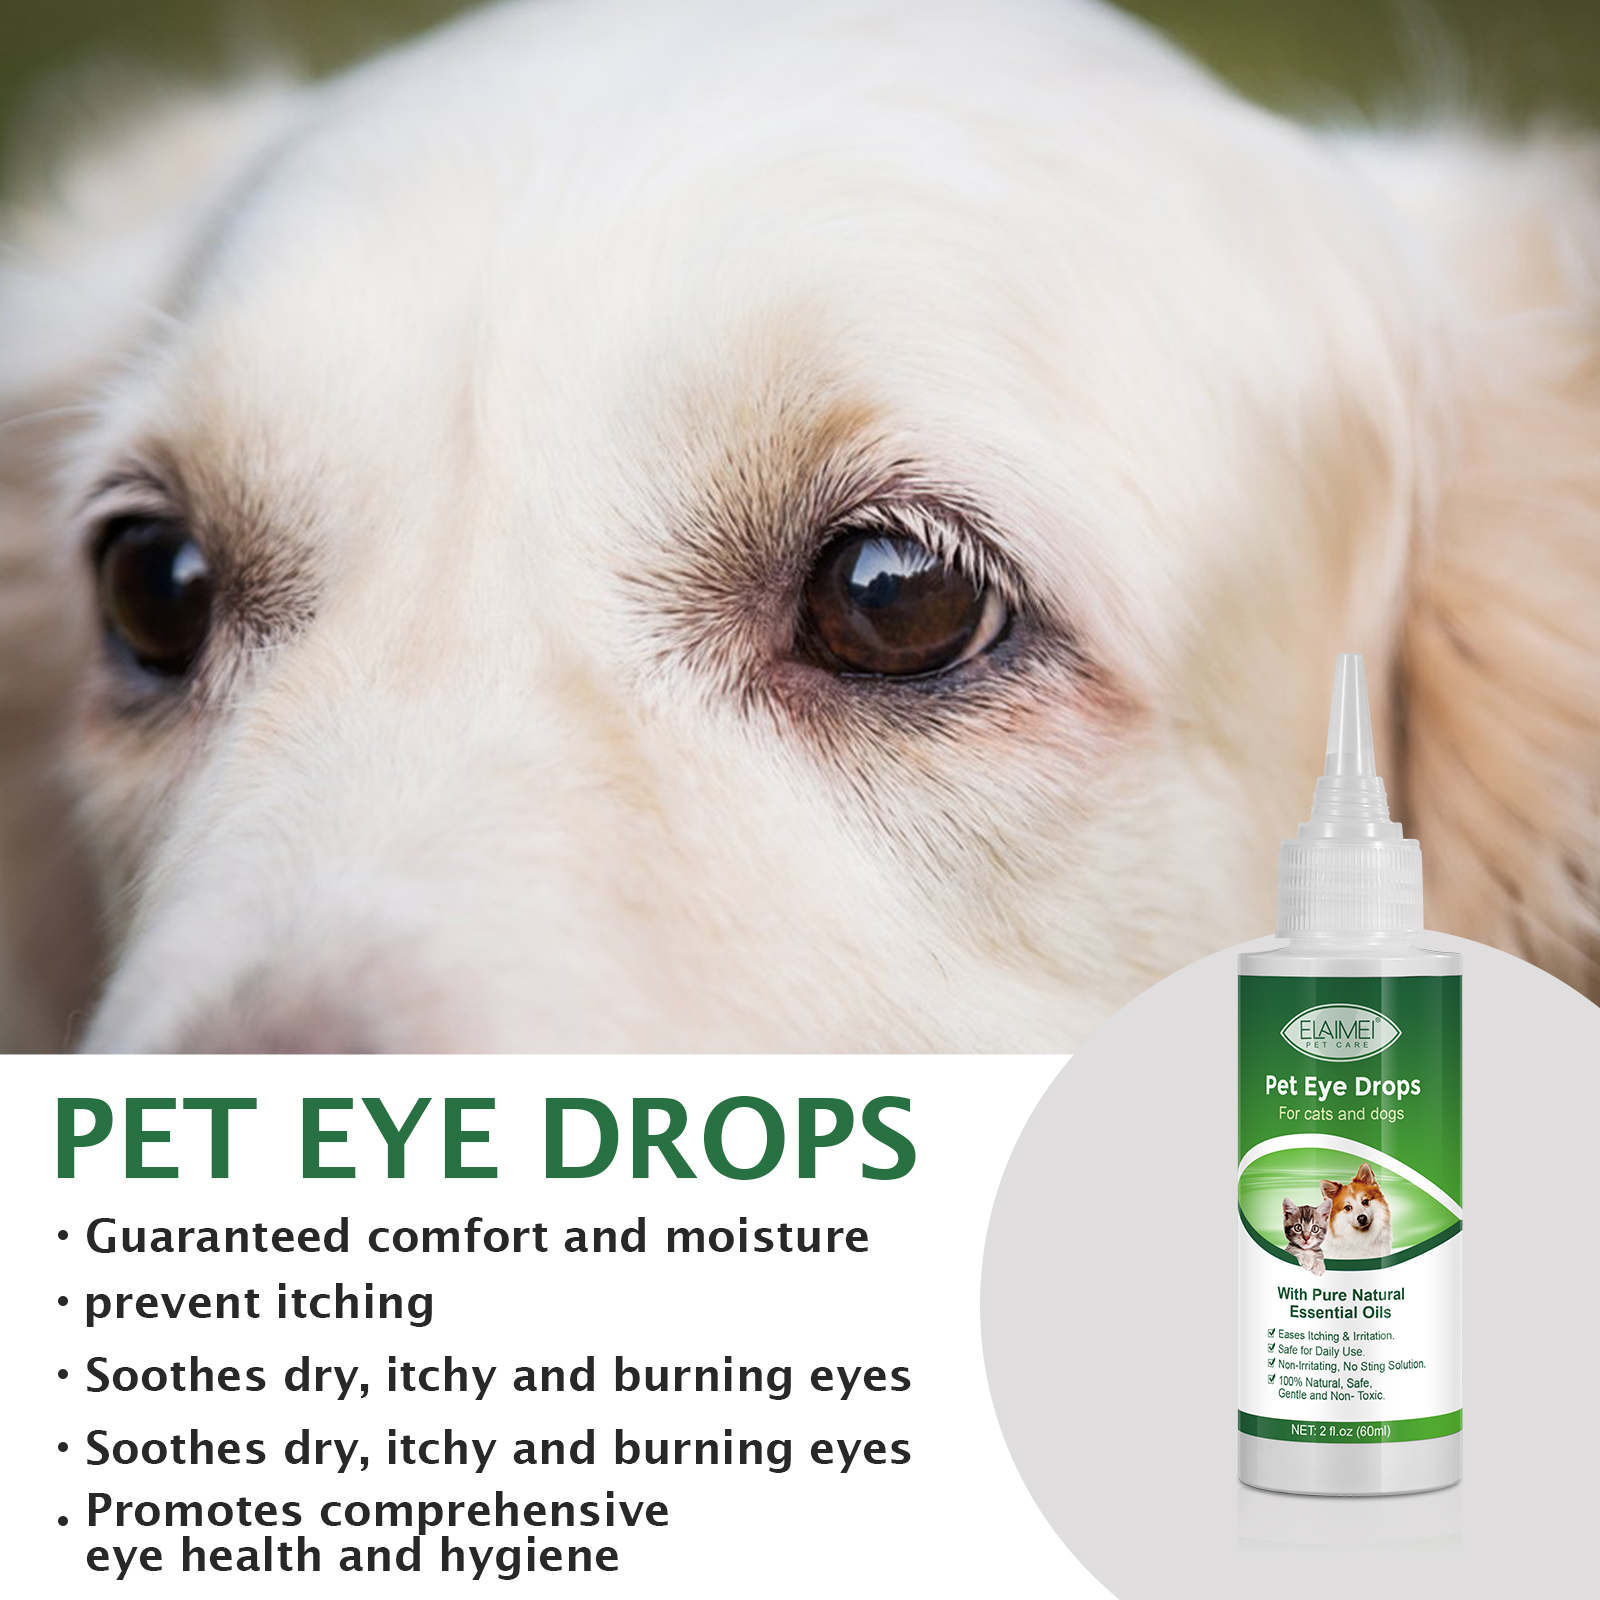 Elaimei Pet Eye Clear Drops Infection Dogs Cats Dry Itchy Irritation Bacterial Natural Animal Pink Eye Treatment Safe Cleanser Daily Use 60ml